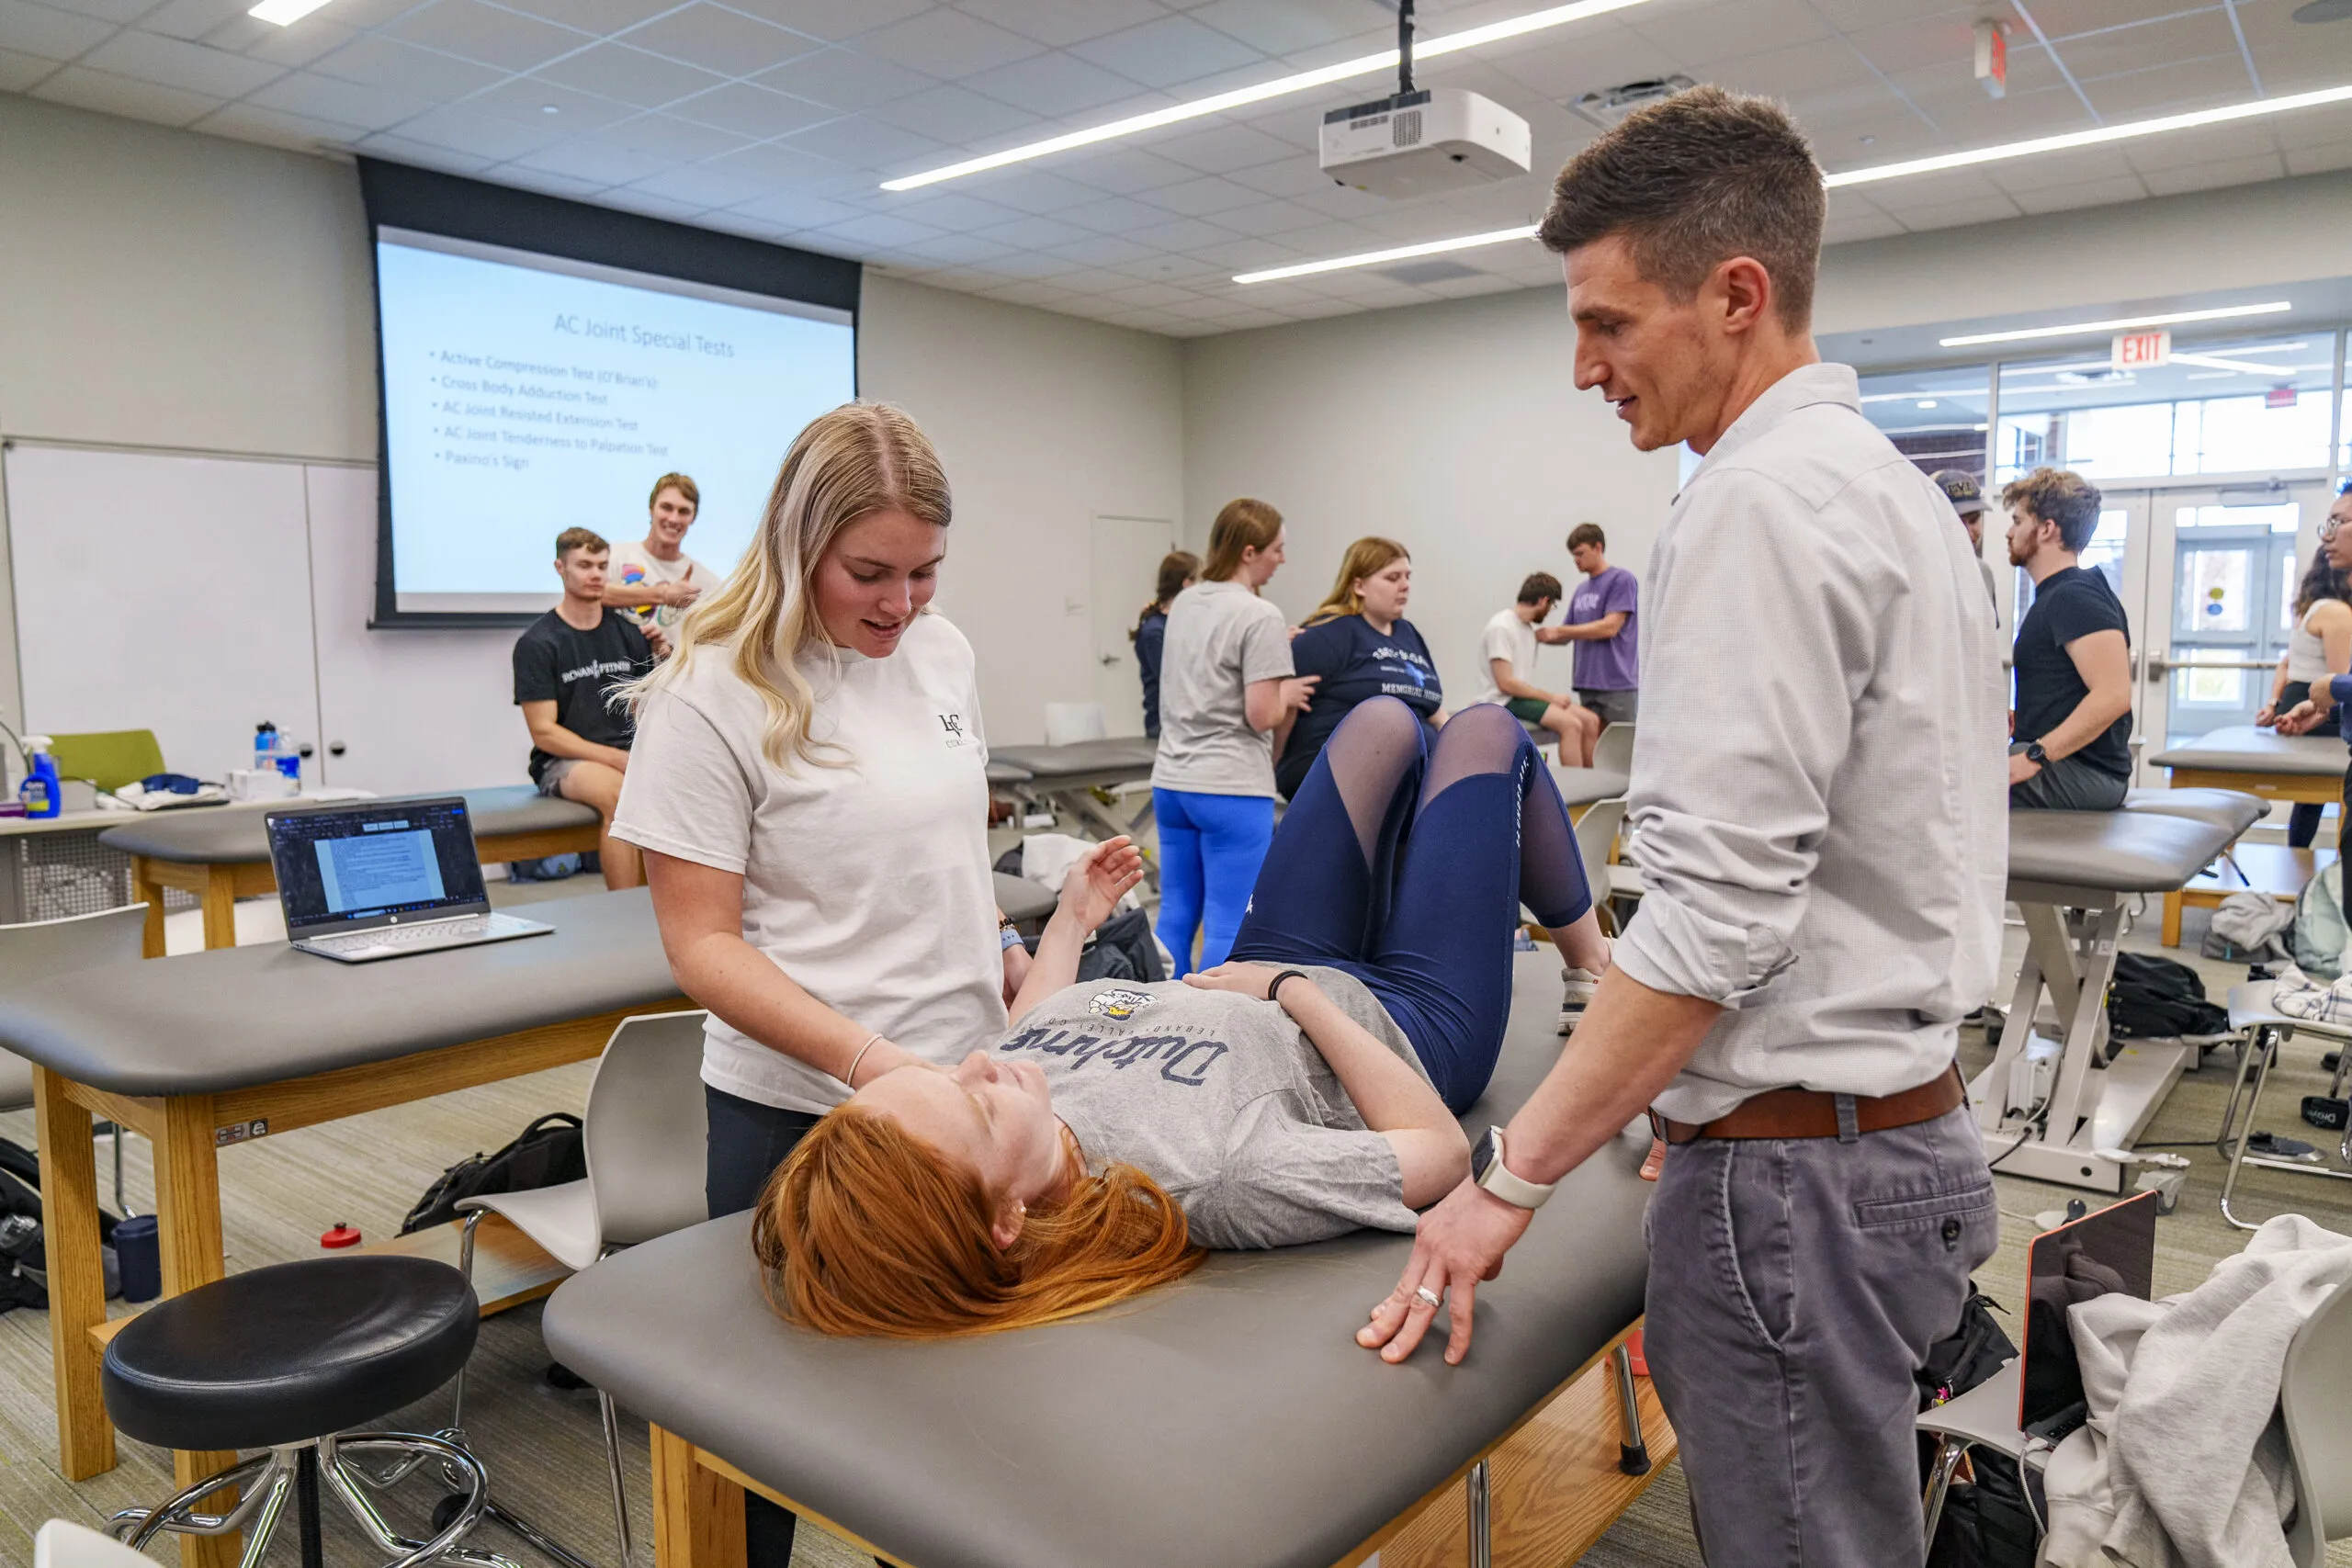 Students practice techniques during physical therapy class.